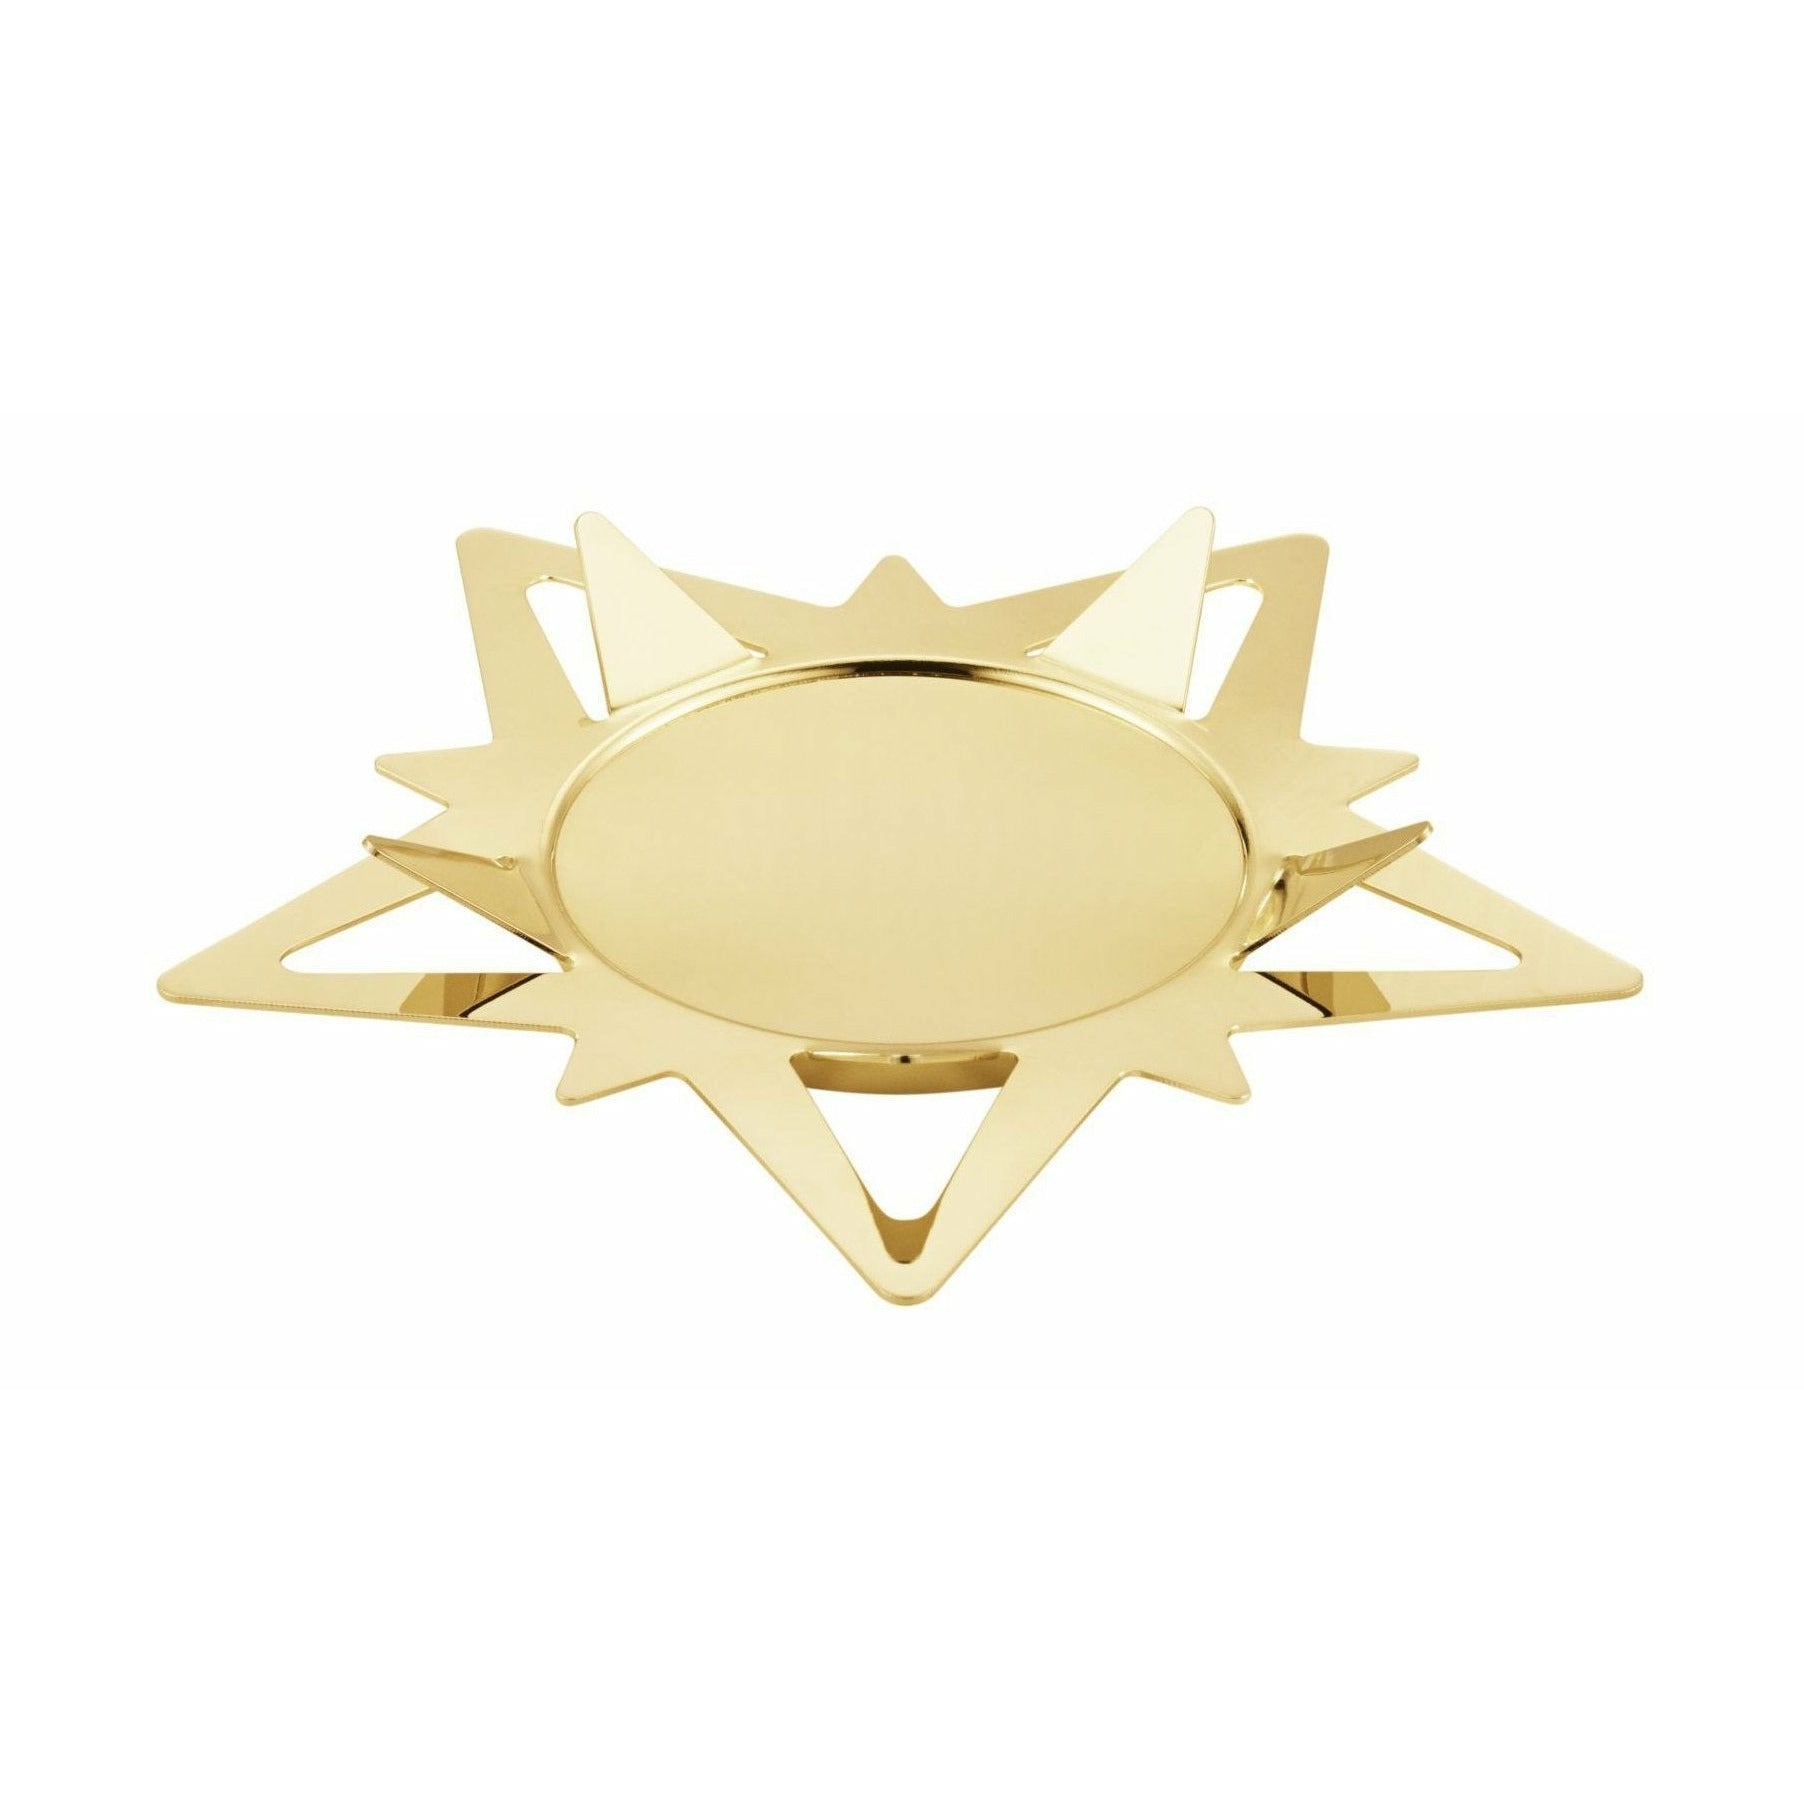 Georg Jensen Classic Christmas Star Candle -Holder for Block Candles, Gold Plane